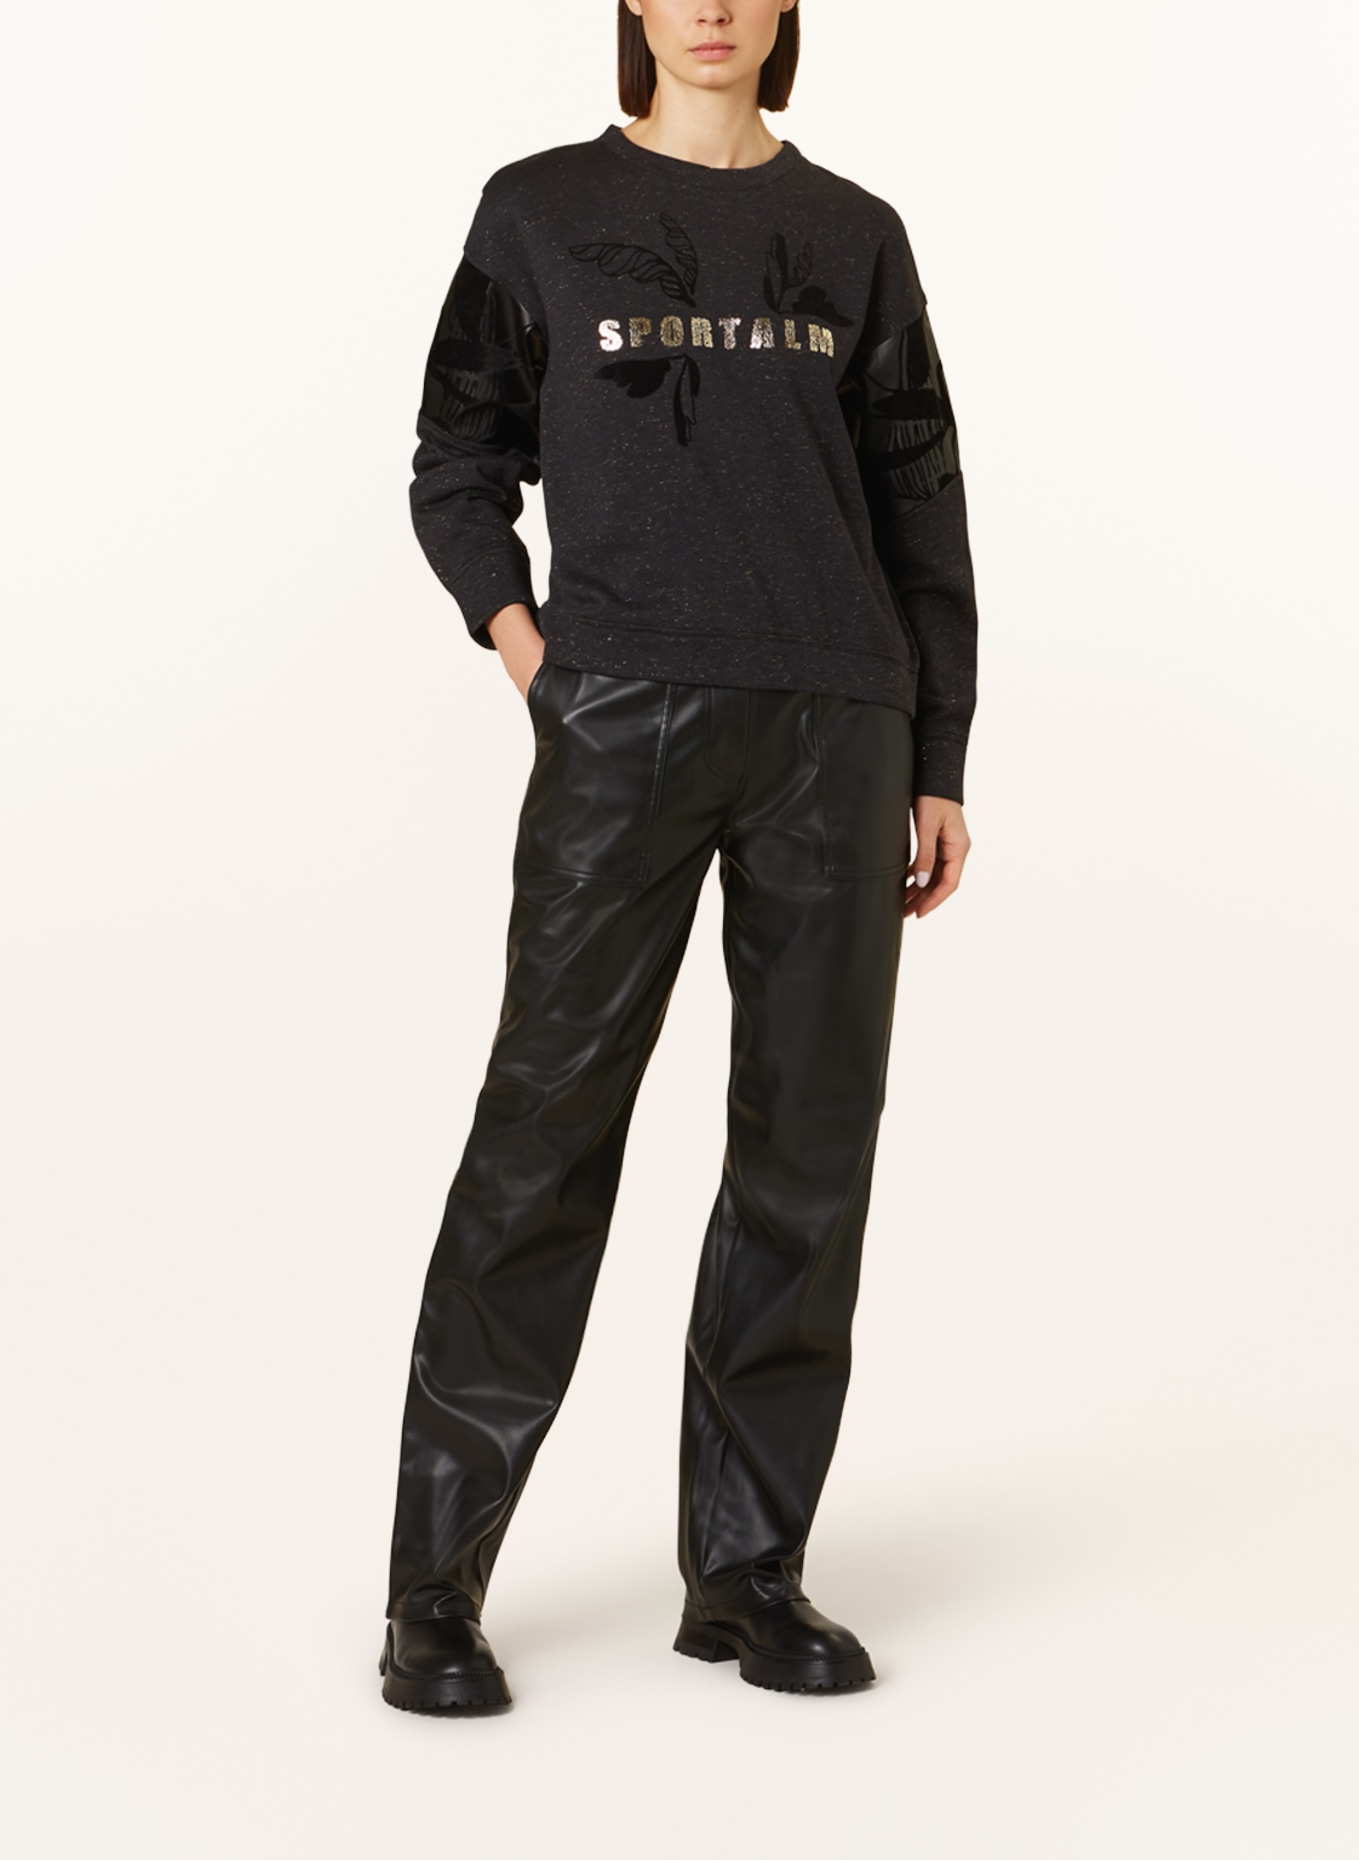 SPORTALM Sweatshirt in mixed materials with glitter thread, Color: BLACK (Image 2)